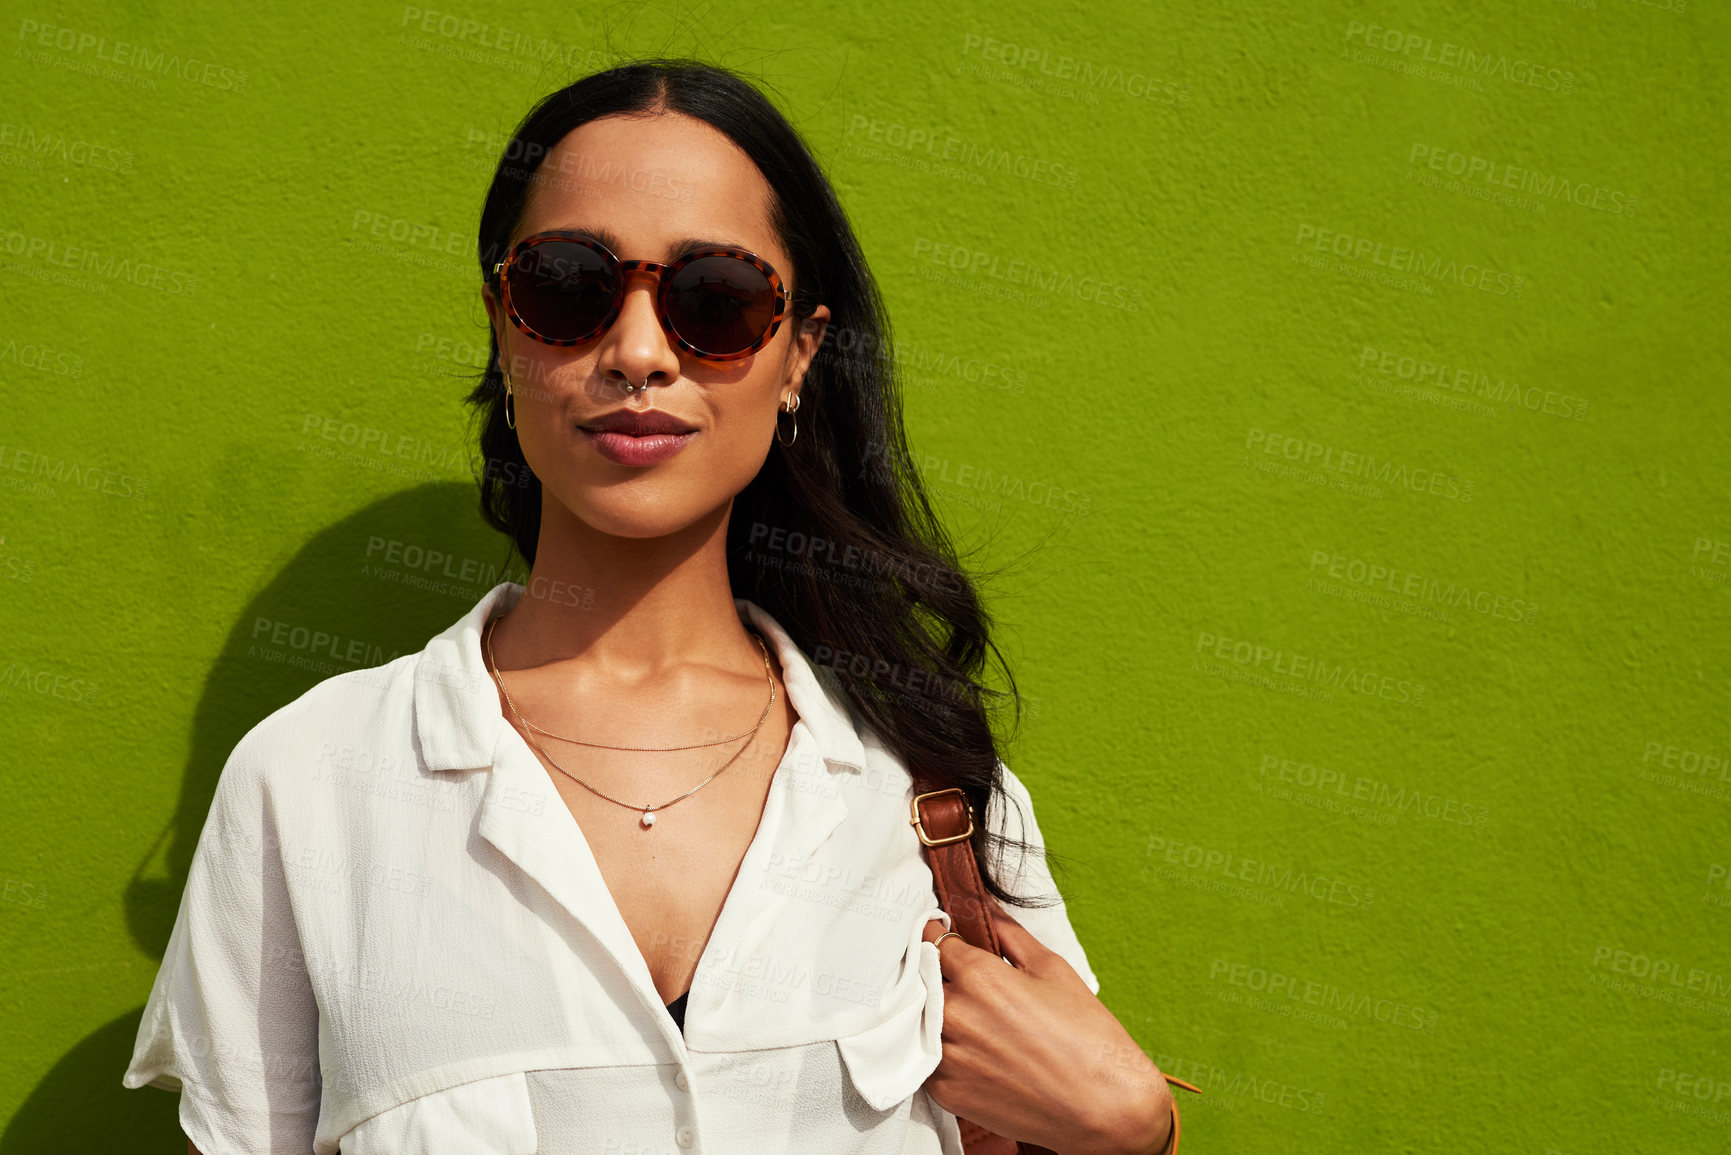 Buy stock photo Cropped portrait of an attractive young woman wearing sunglasses while standing alone against a green background in the city